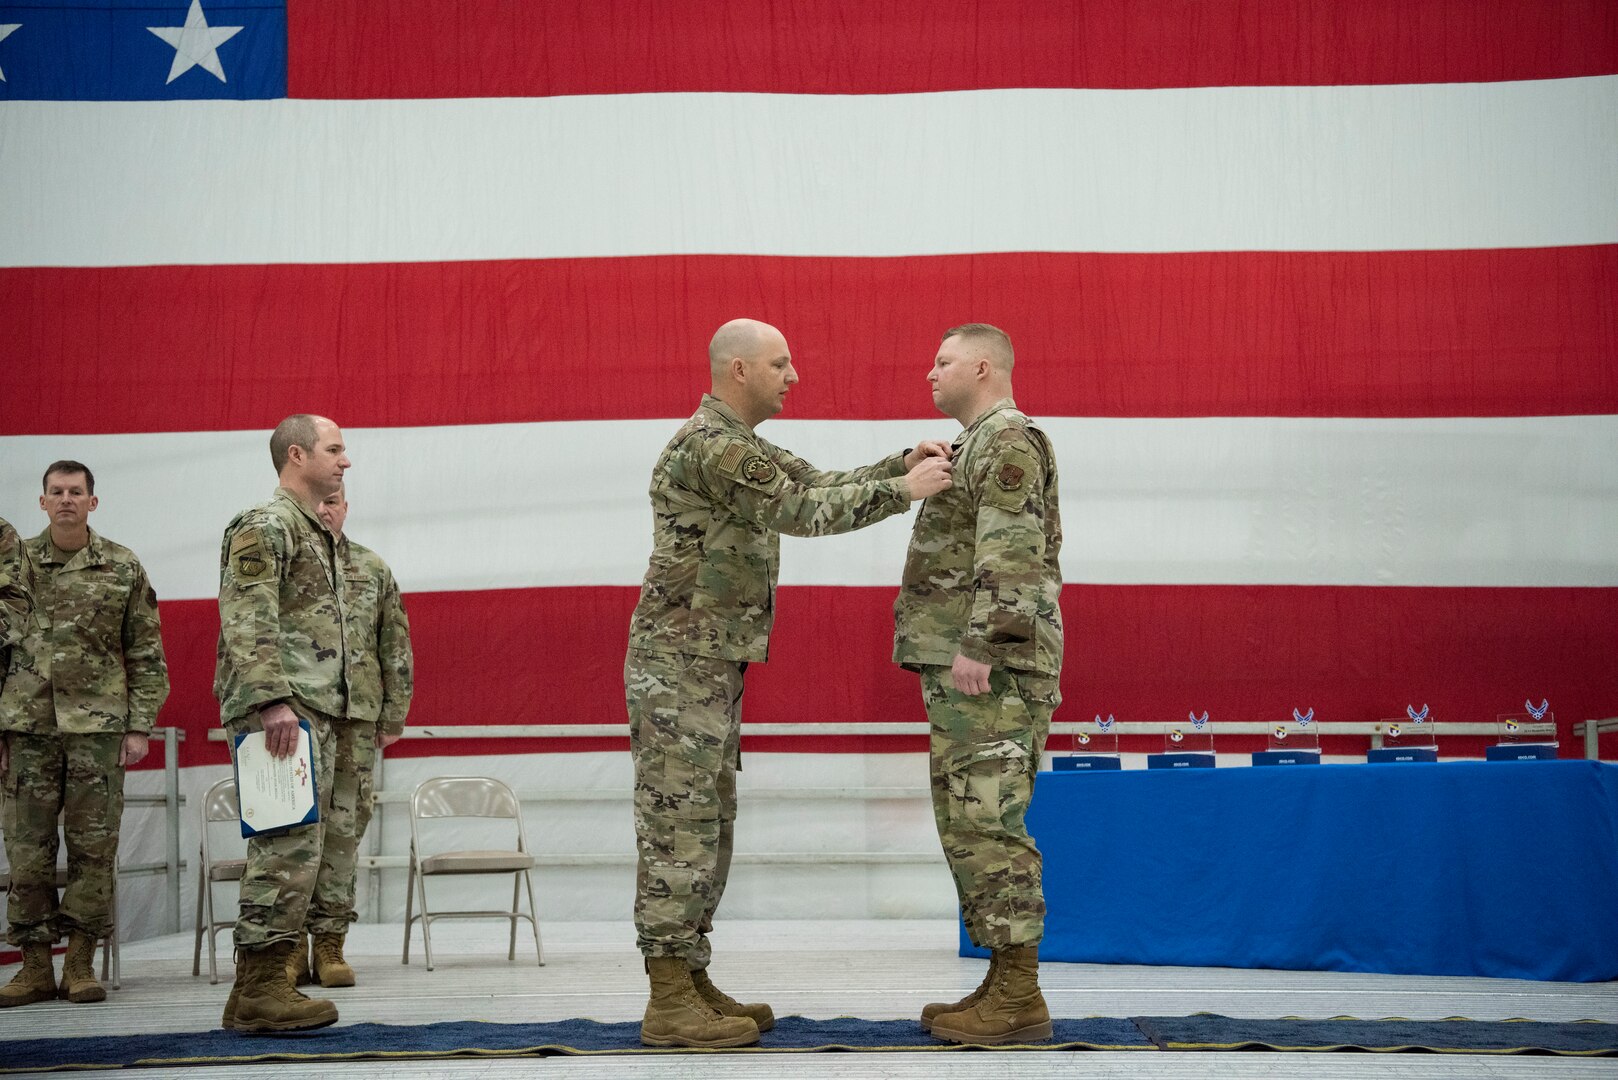 U.S. Air Force Chief Master Sgt. David Olejarz, 128th Civil Engineer senior enlisted leader, was awarded the Bronze Star Medal during a ceremony held at the 128th Air Refueling Wing, Milwaukee, Feb. 4, 2024. The Bronze Star Medal is awarded for meritorious service in a combat zone.(U.S. Air National Guard photo by Master Sgt. Lauren Kmiec)